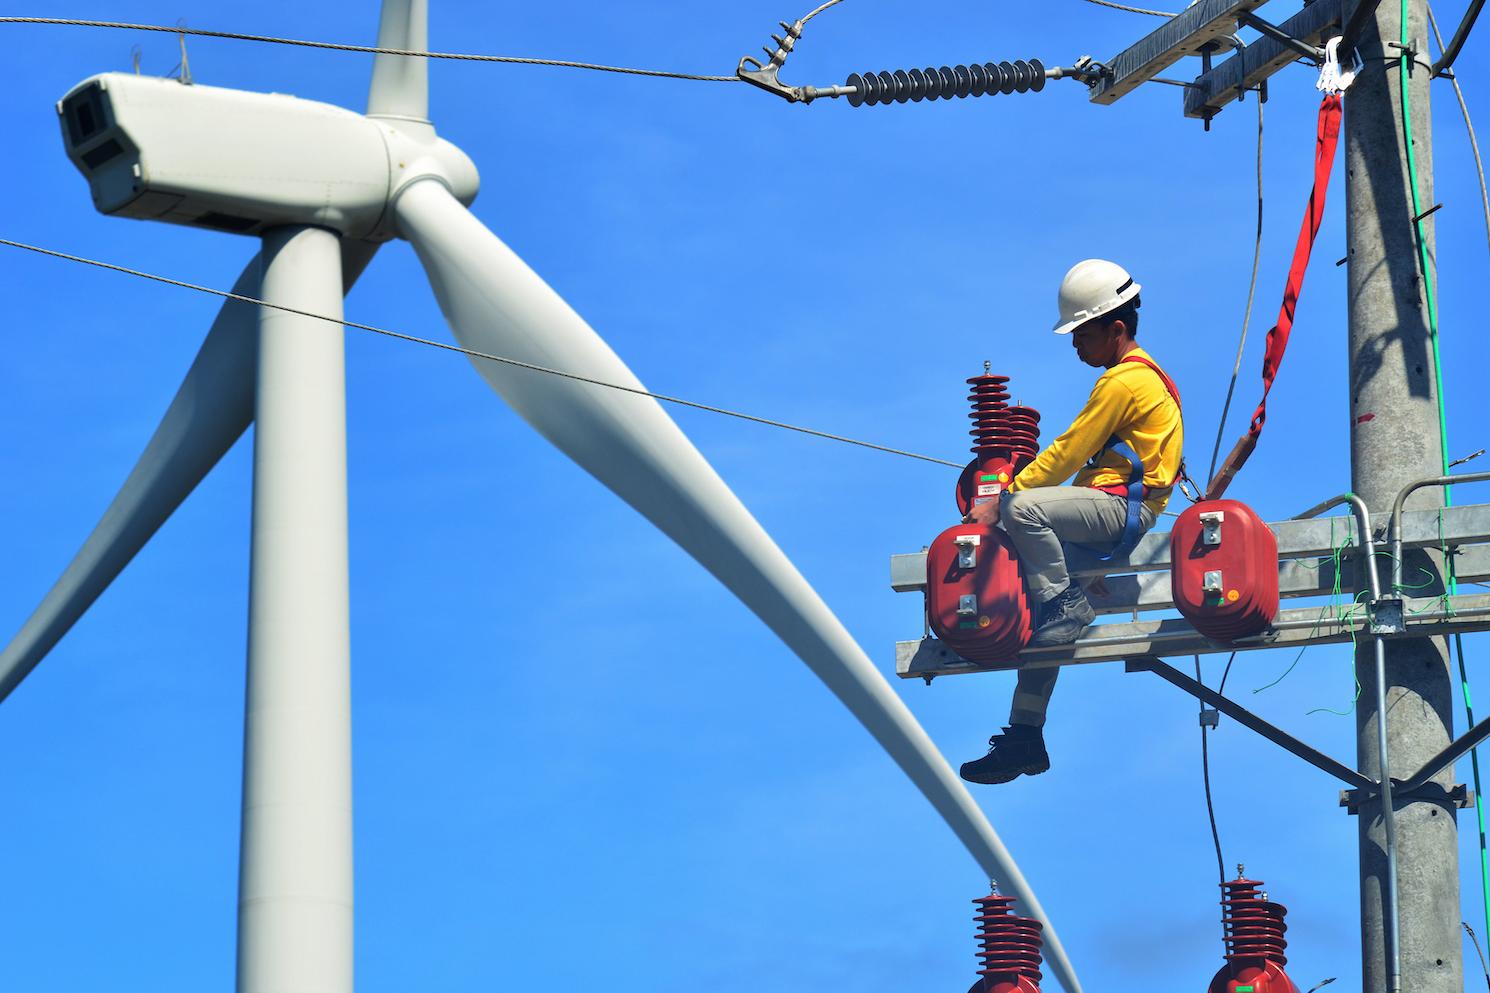 A technician sits on his high post repairing an electrical pole in front of a wind turbine.